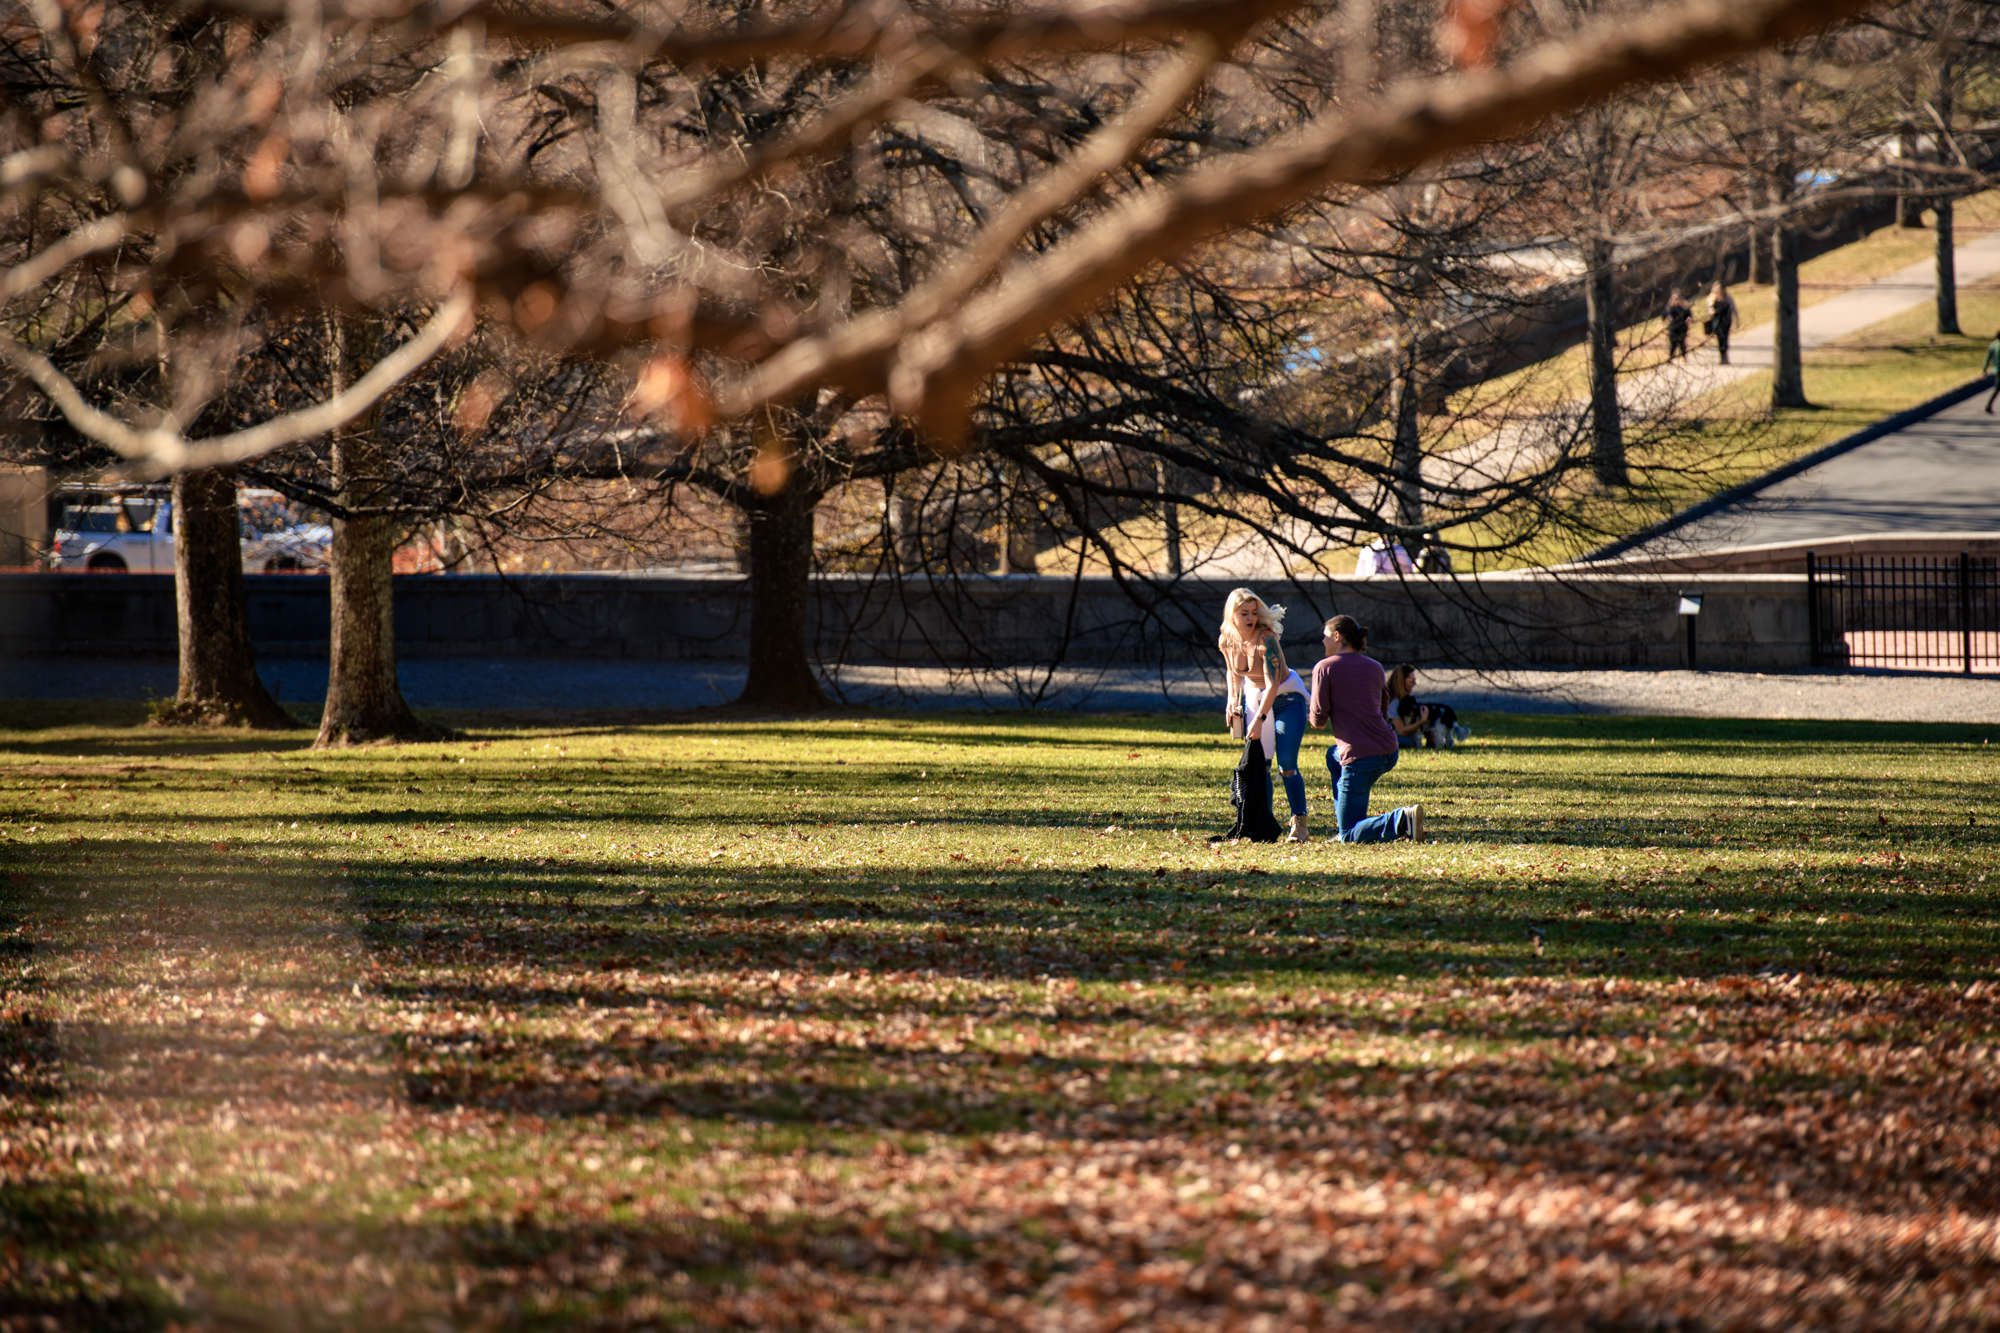 Jordan, down on one knee, proposing to a surprised Cassidy under the golden fall foliage at Biltmore Estate